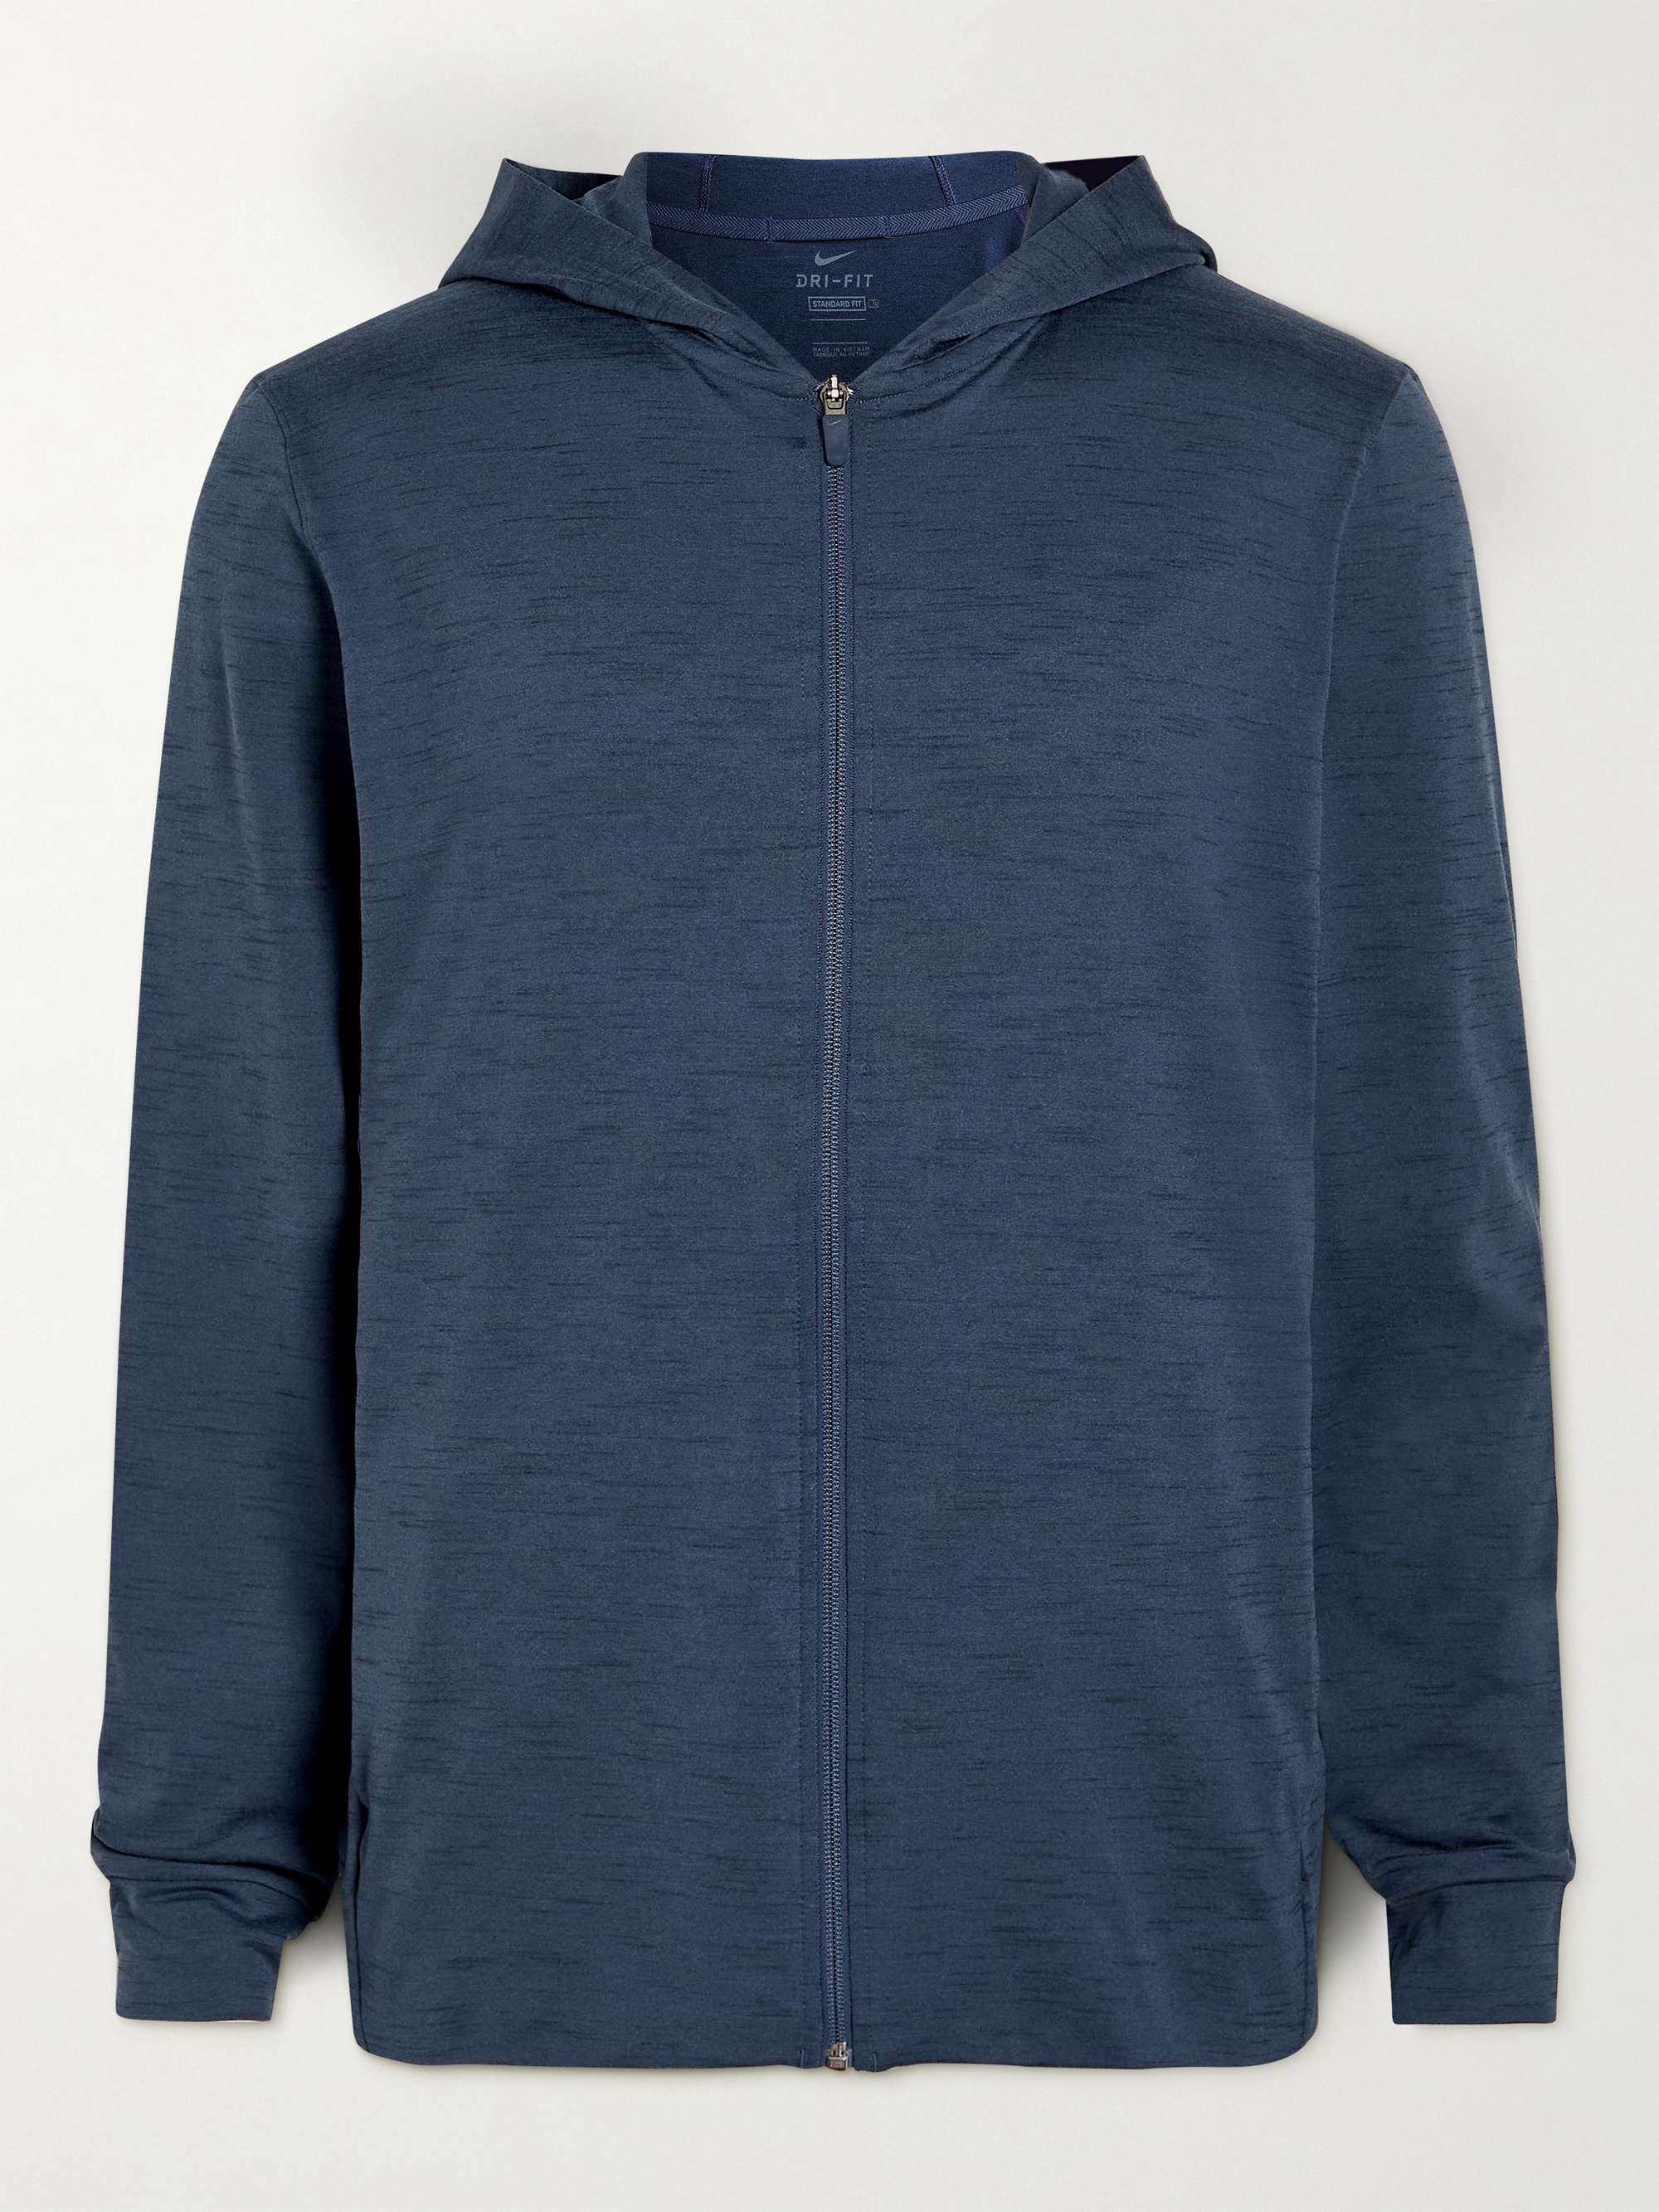 NIKE TRAINING Dri-FIT Recycled Jersey Zip-Up Training Hoodie